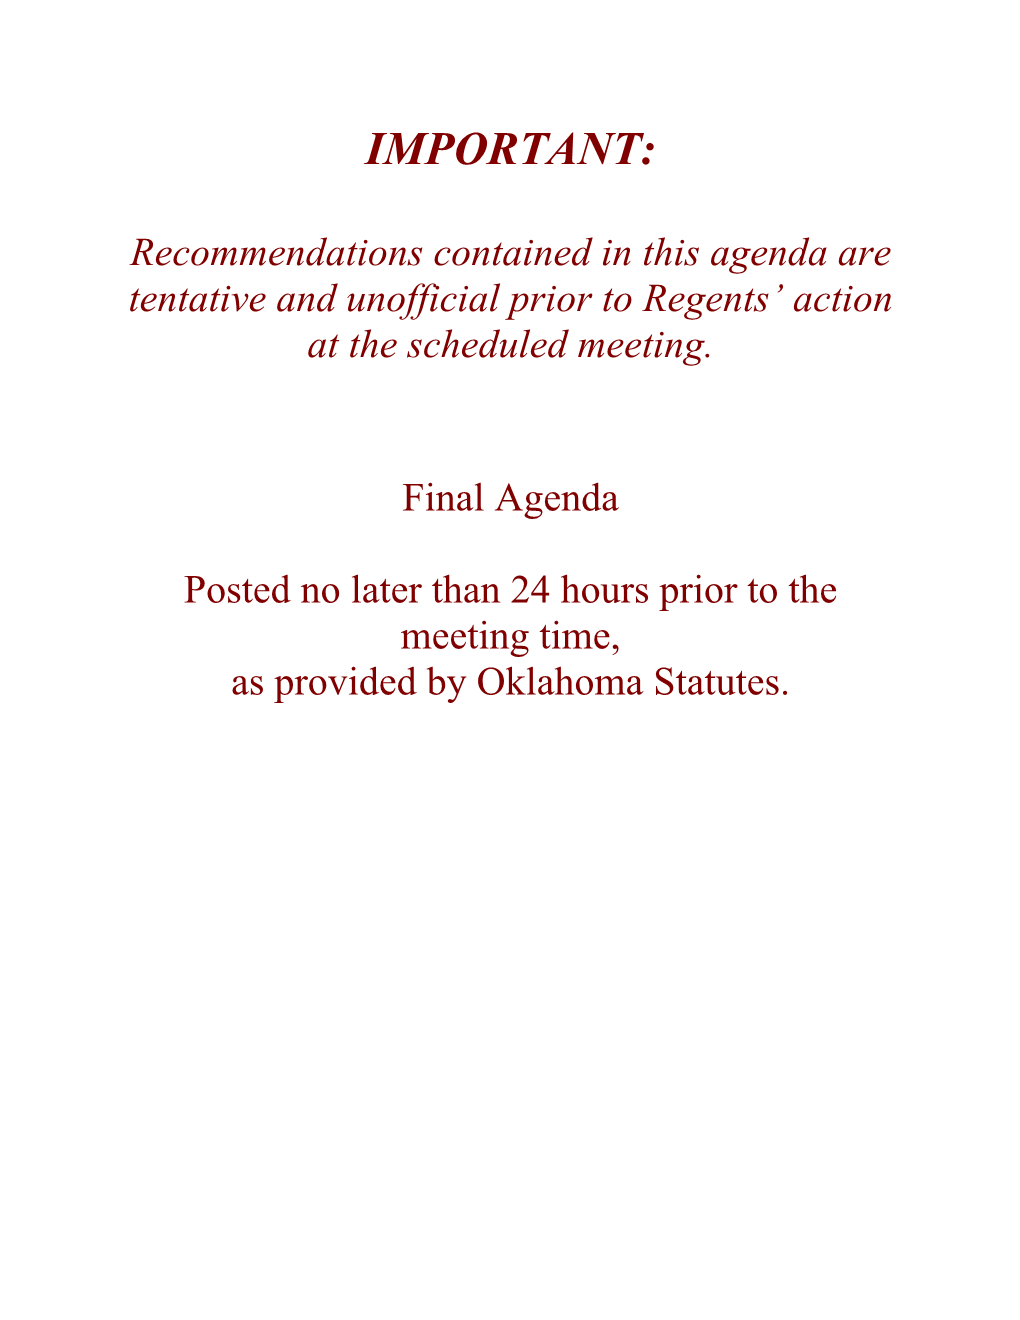 Agenda Are Tentative and Unofficial Prior to Regents’ Action at the Scheduled Meeting